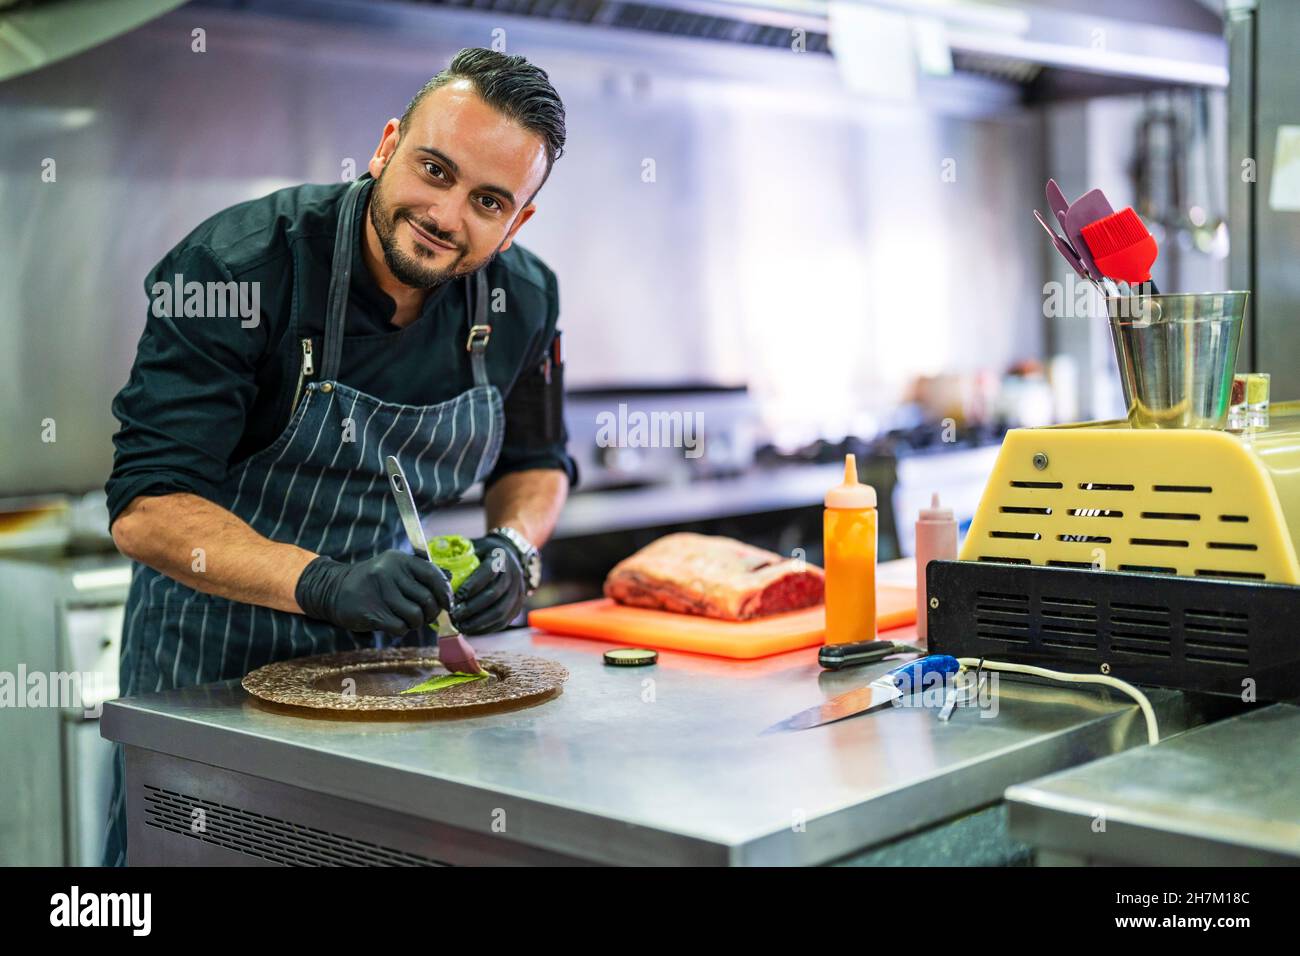 Smiling chef decorating plate for presentation in kitchen of restaurant Stock Photo